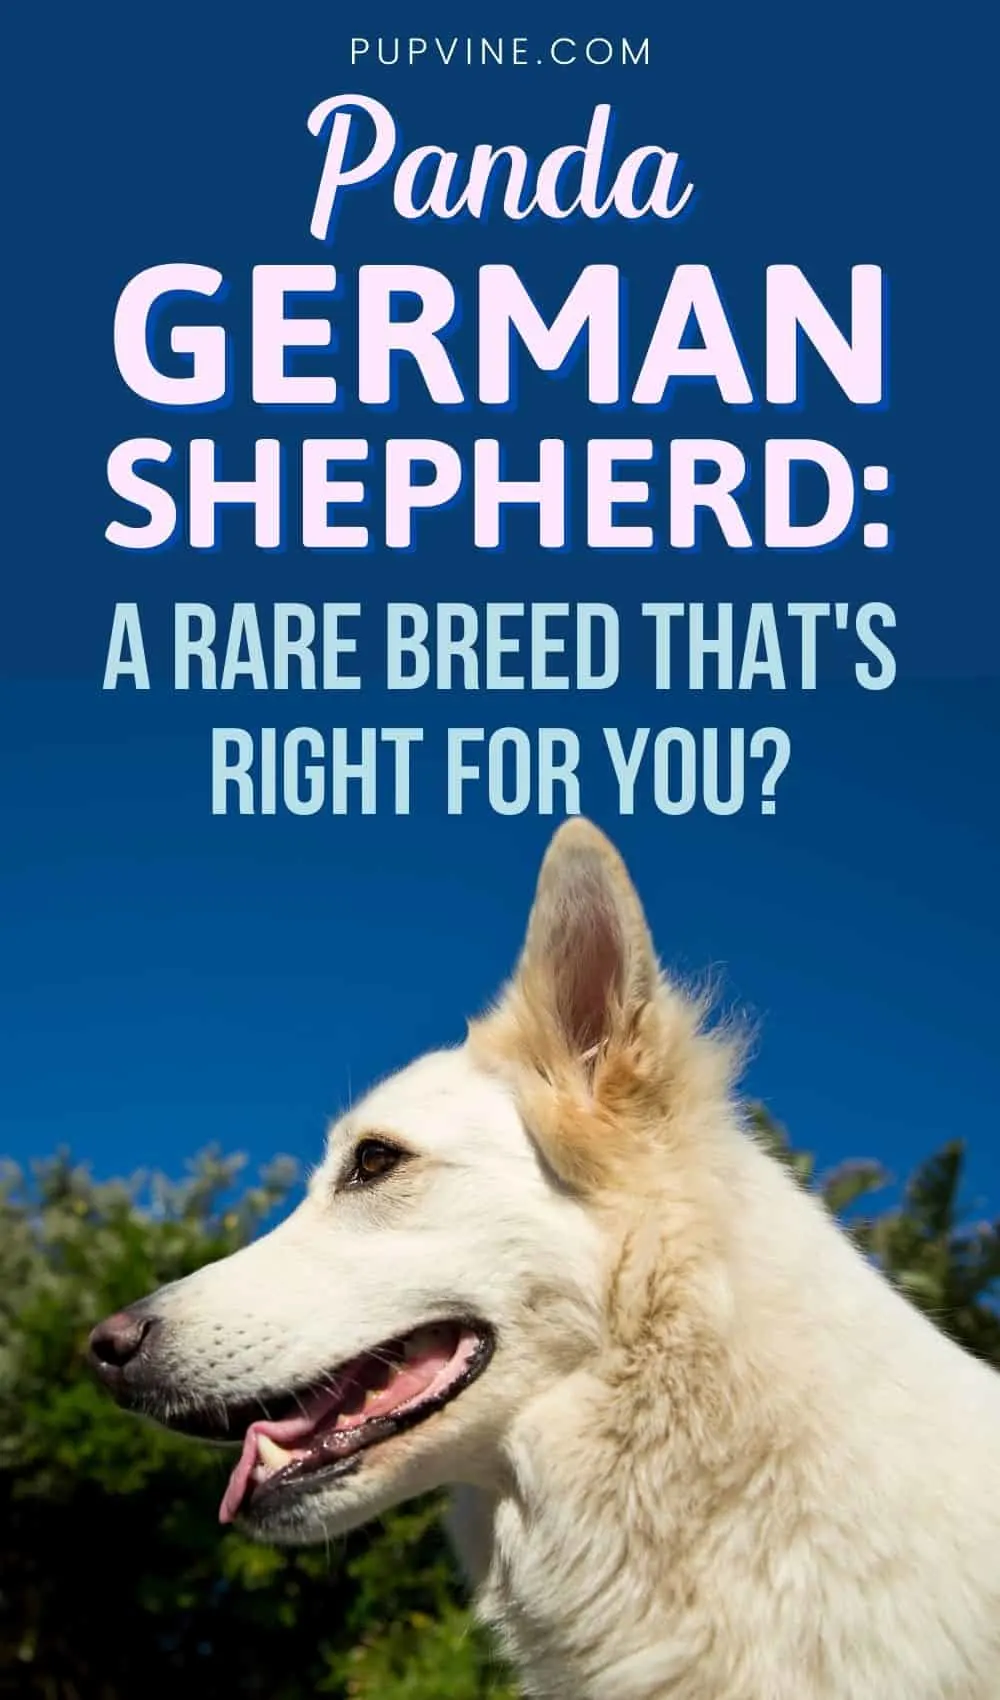 Panda German Shepherd A Rare Breed That's Right For You